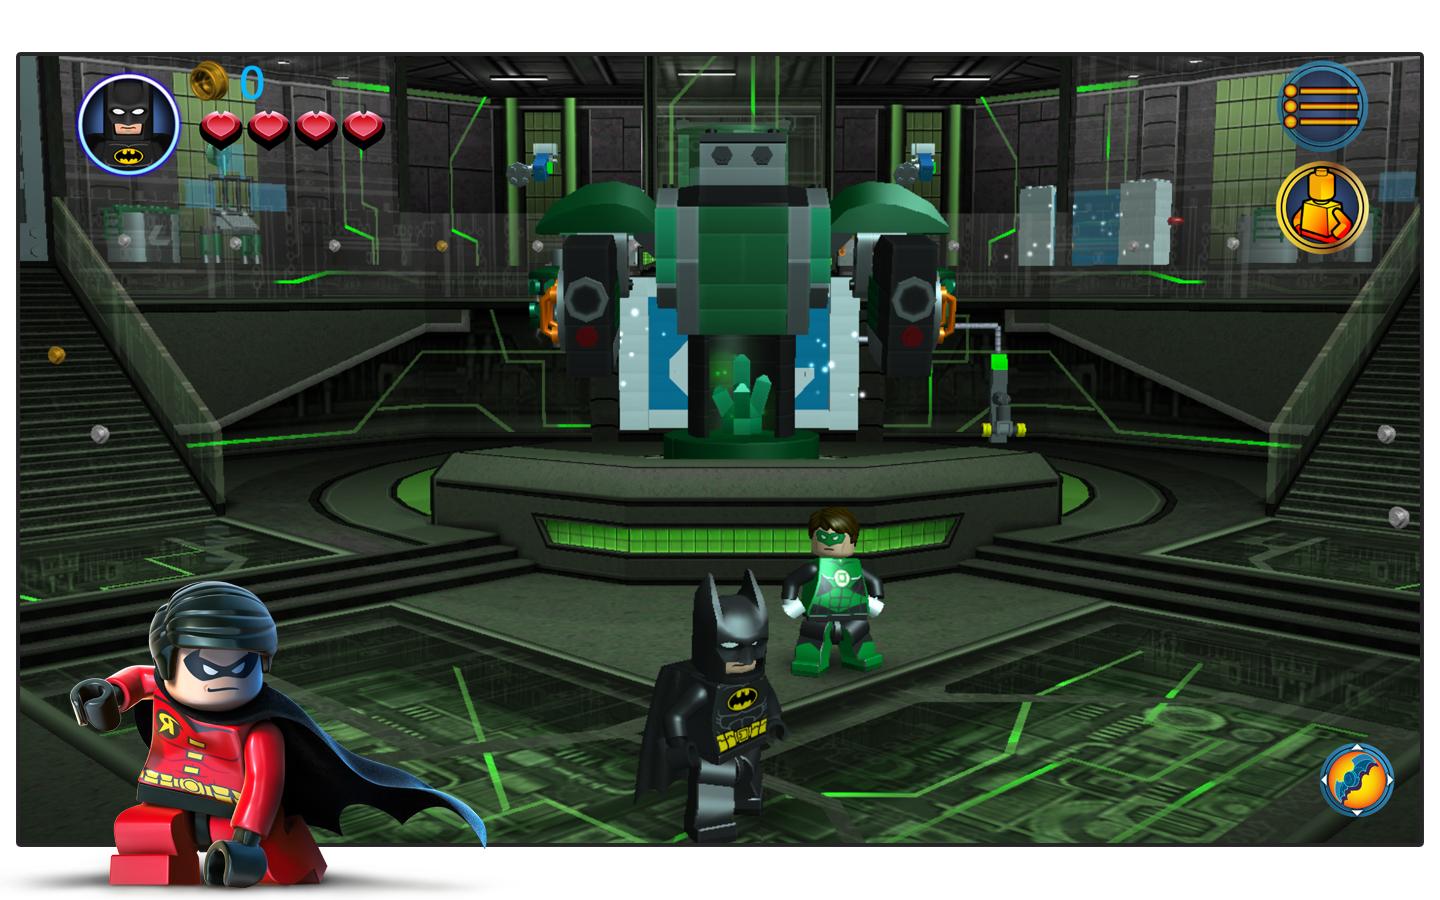 Tải Game LEGO Batman: DC Super Heroes (Mod) .935adreno_mod APK Miễn  Phí Cho Android | Appvn Android